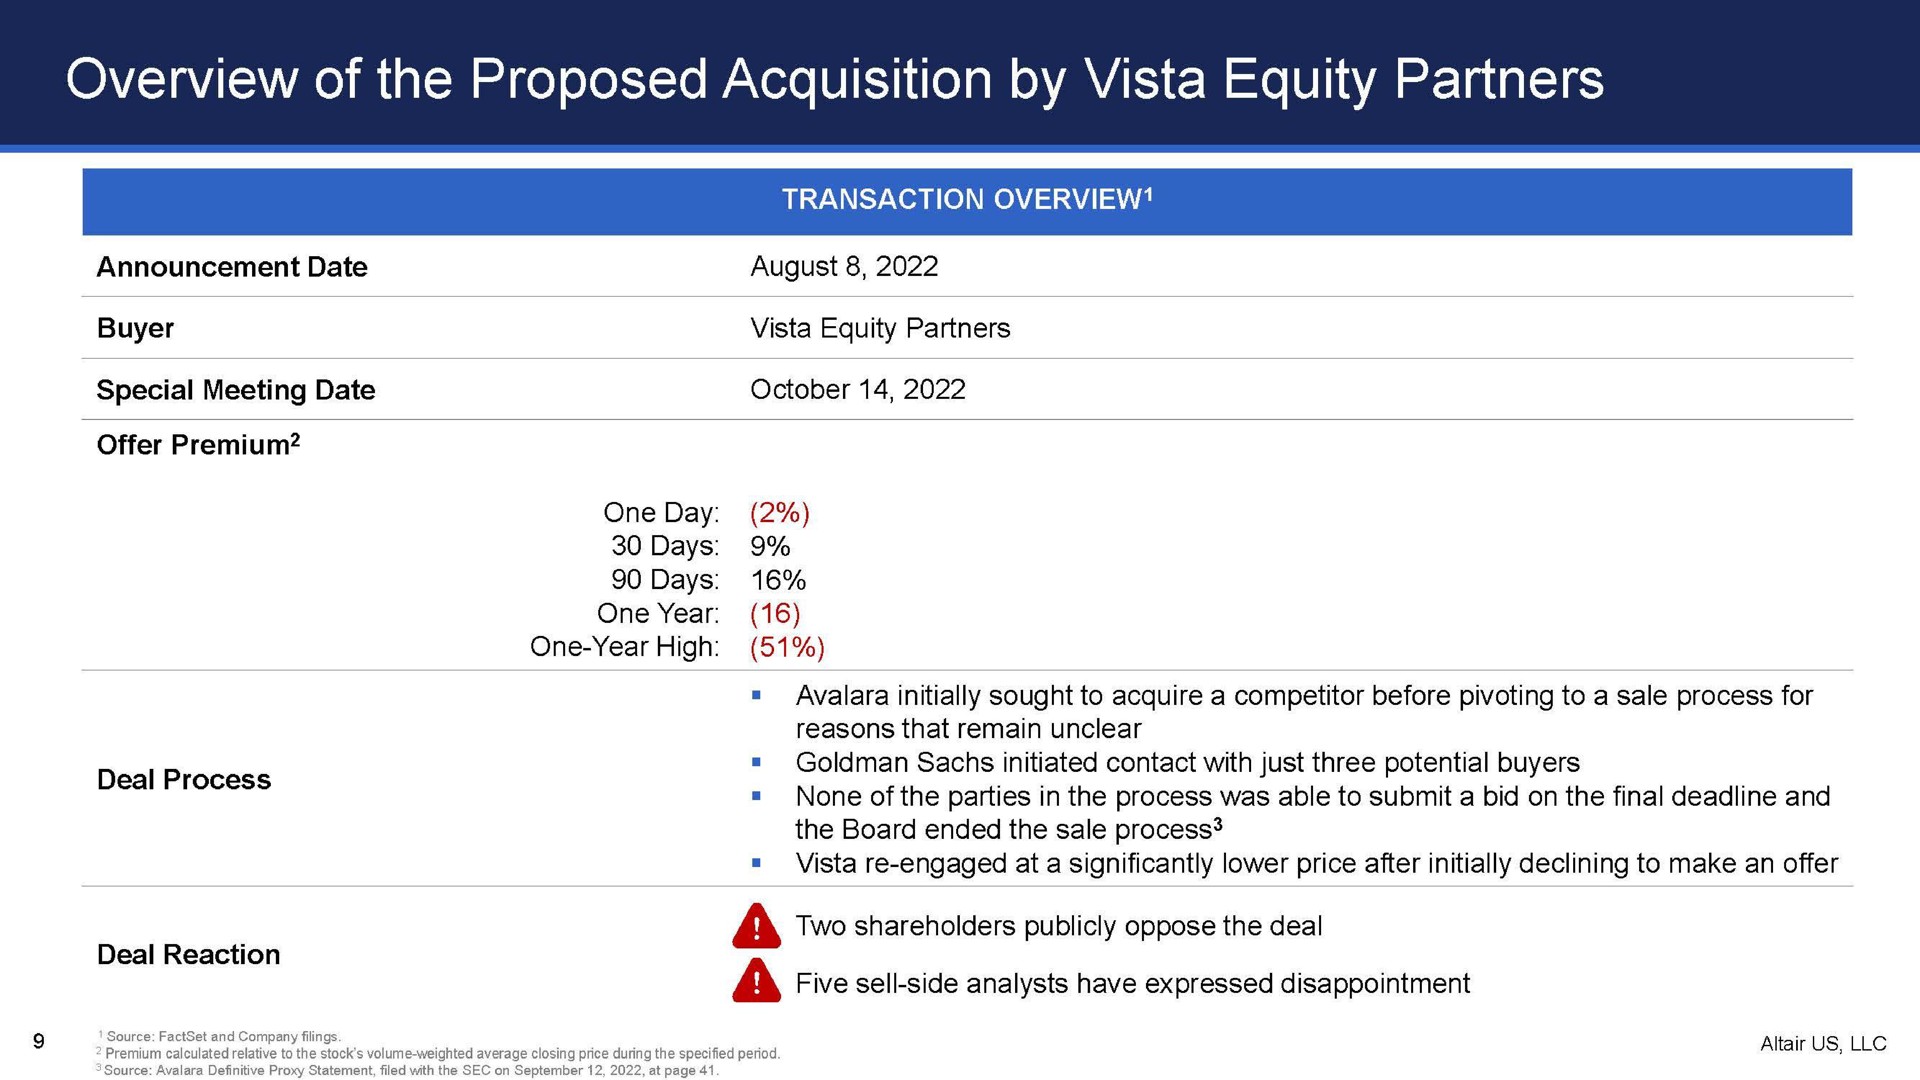 overview of the proposed acquisition by vista equity partners | Altair US LLC